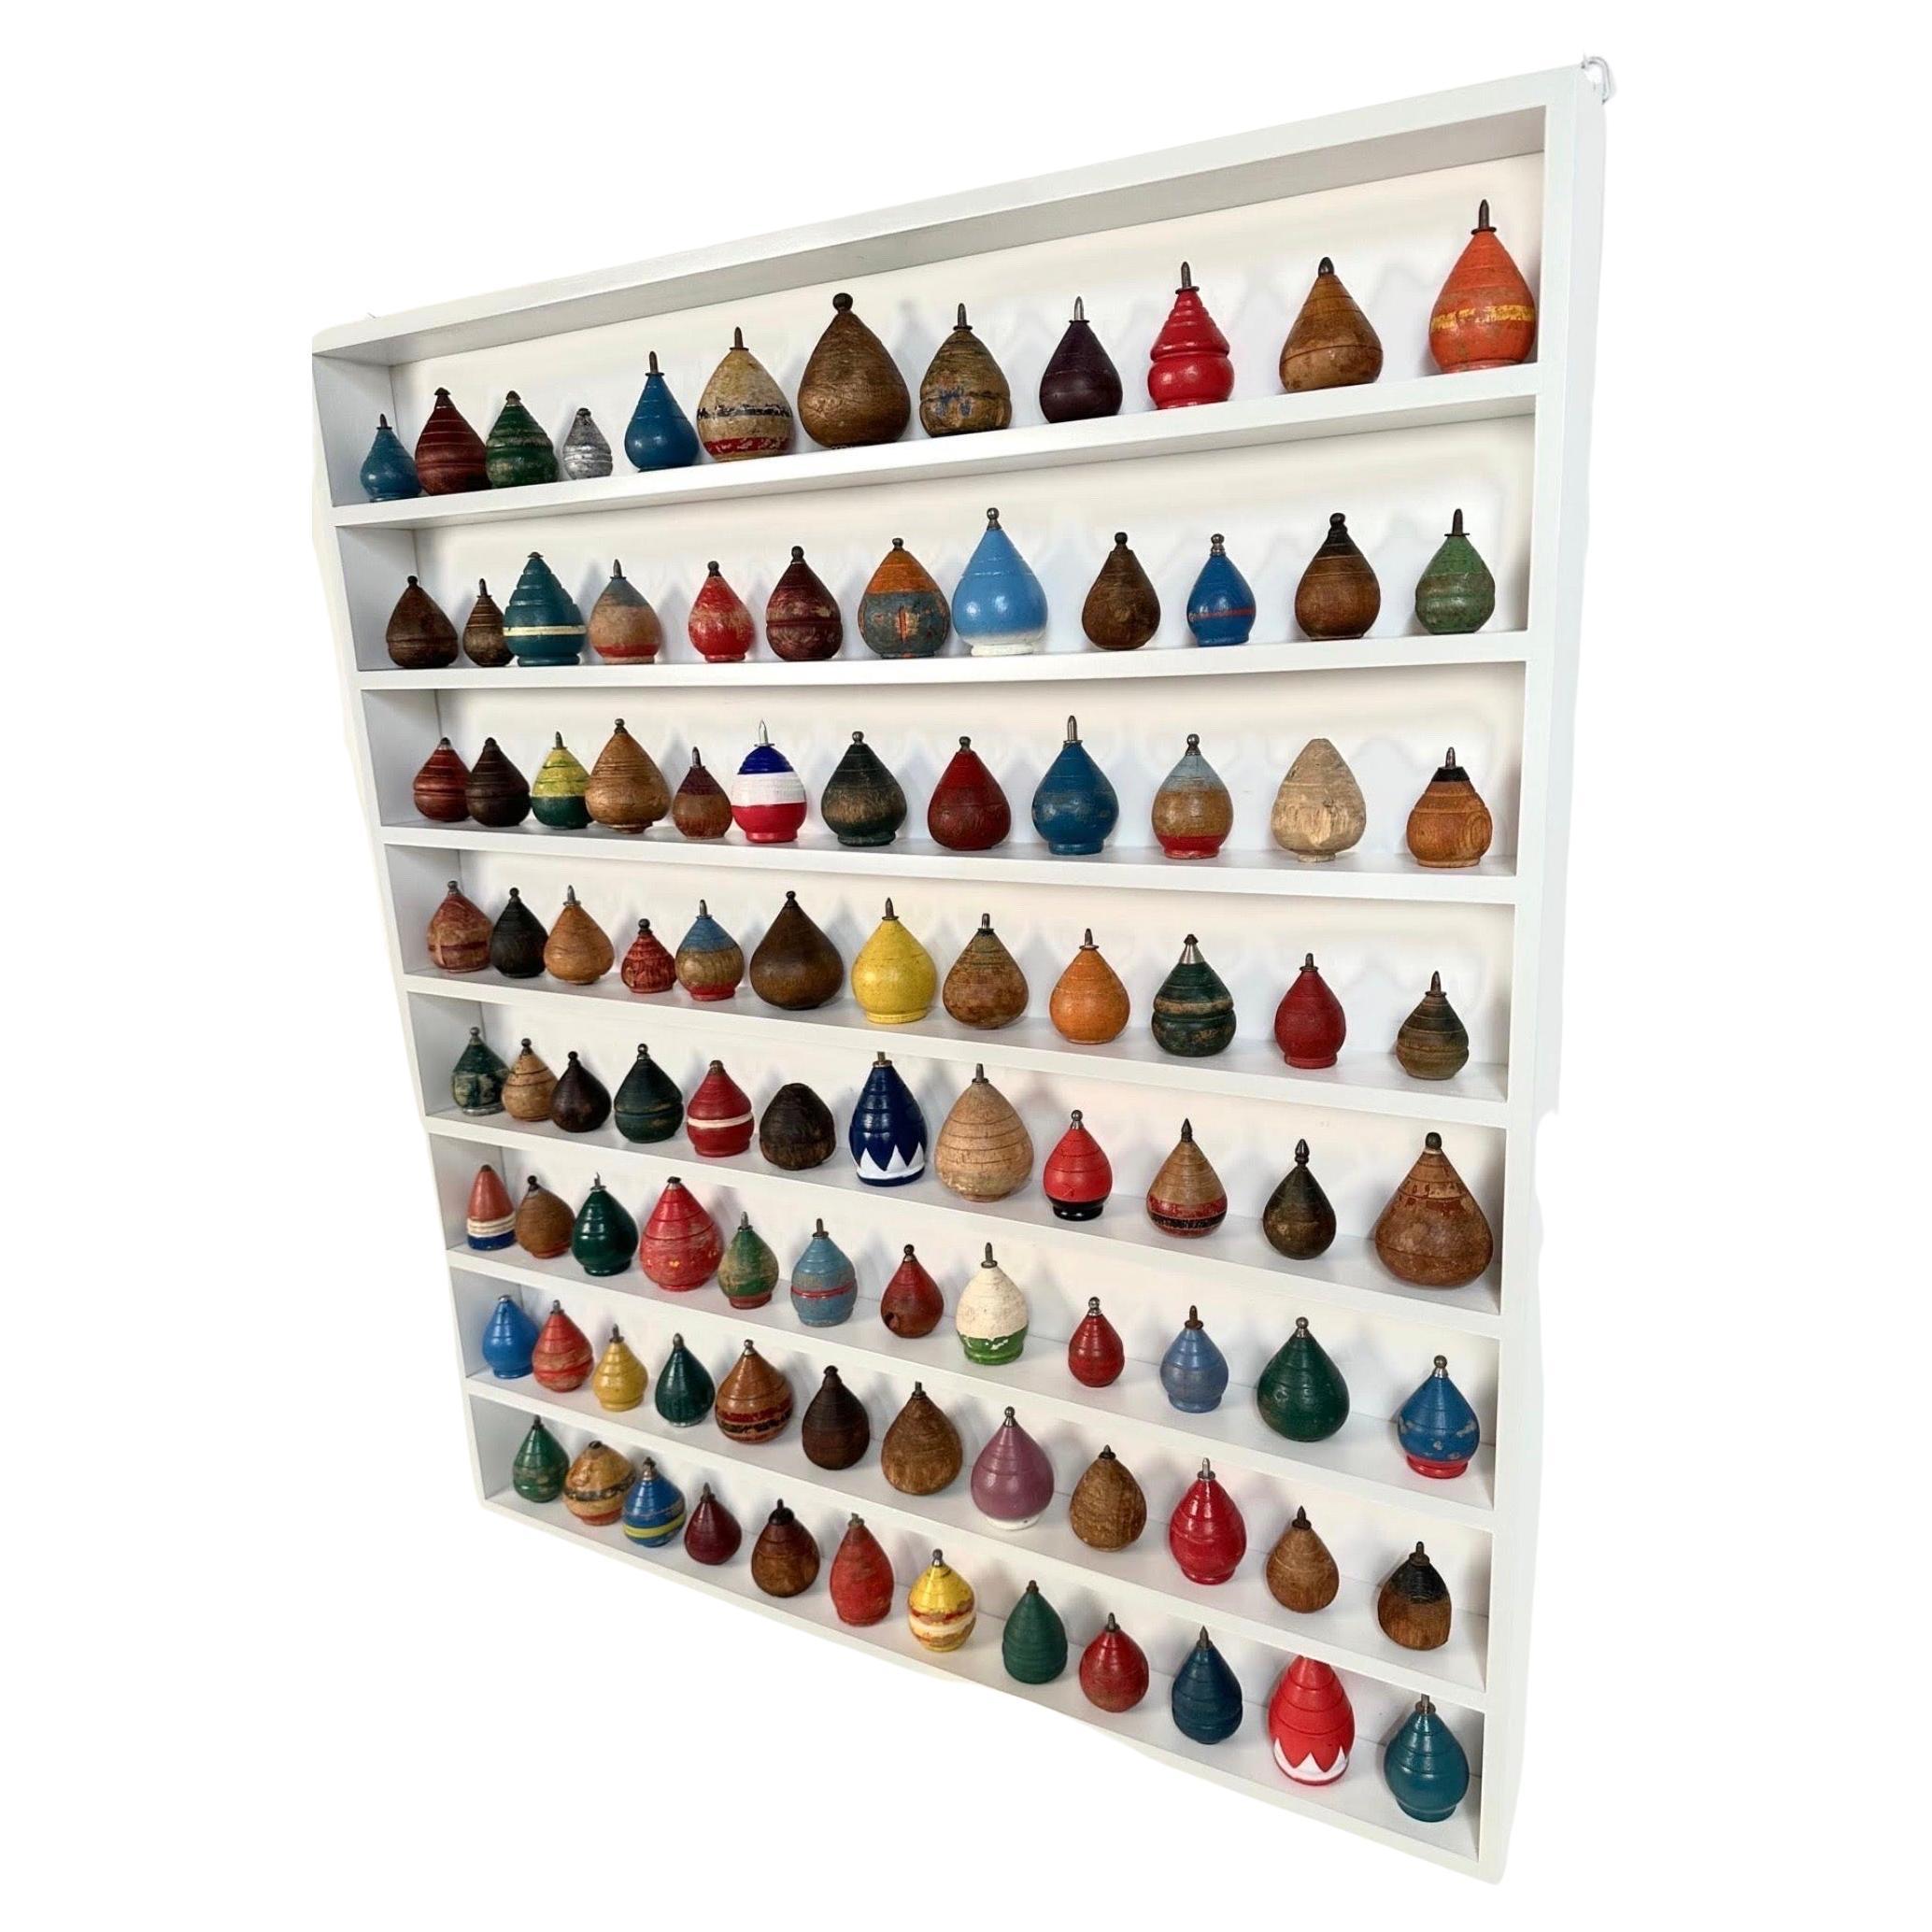 A great graphic collection of 98 antique toy wooden spinning tops of various shapes and colors dating from 1880 to 1960.
This collection is displayed in a high quality custom made white painted maple display. The tops can be arranged in any